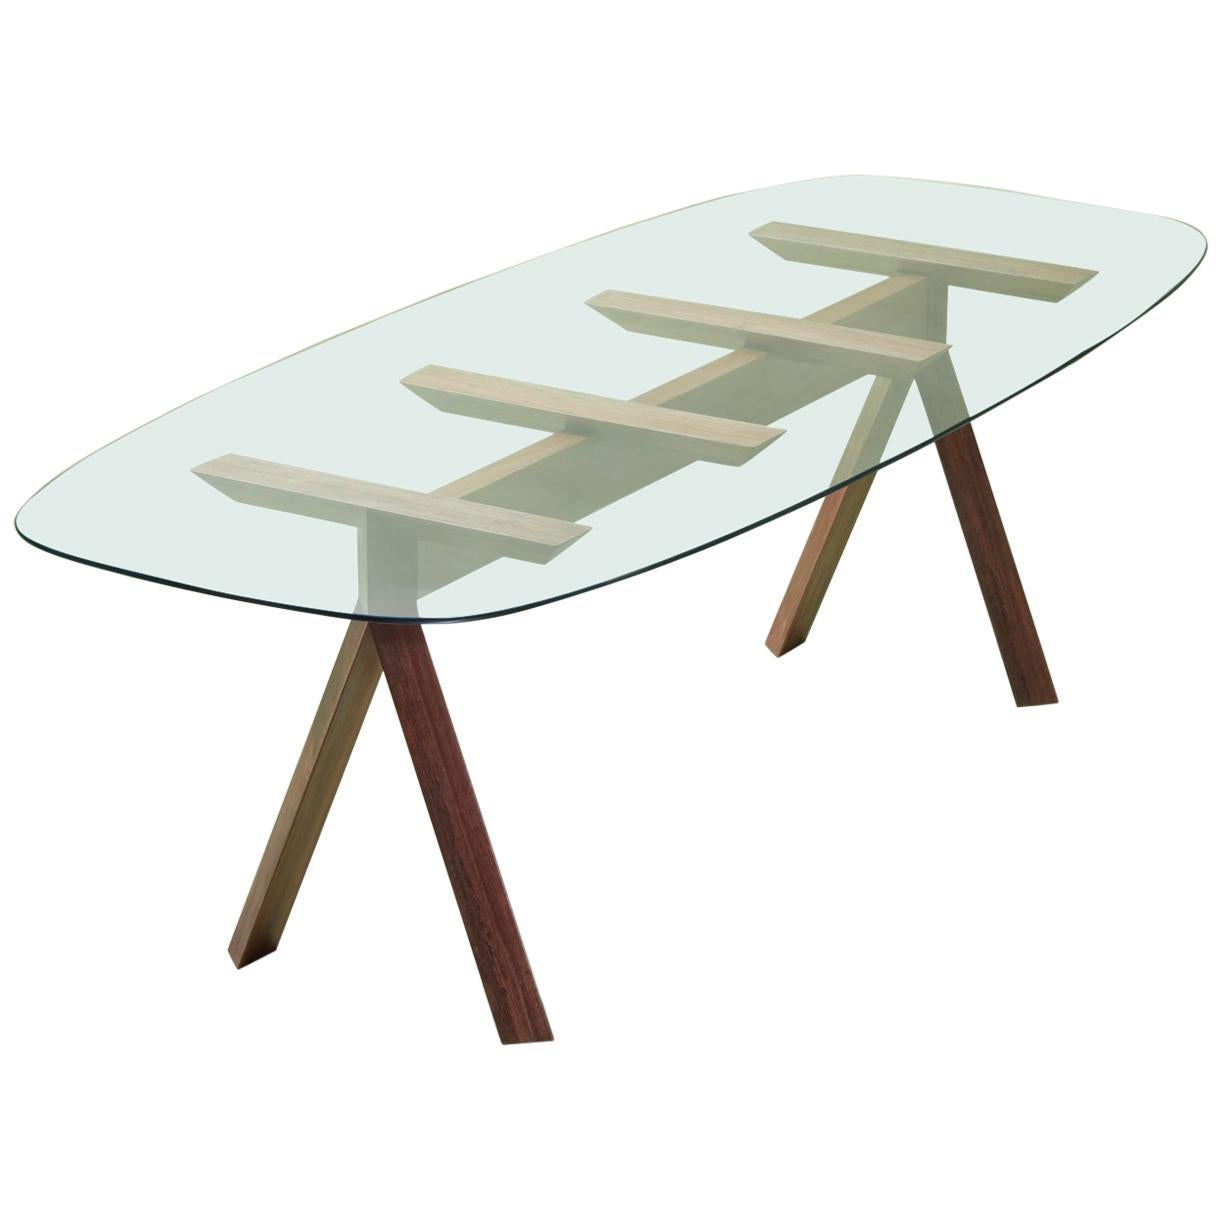 Tepacê Dining Table in Hardwood with Glass Top, Brazilian Contemporary Design For Sale